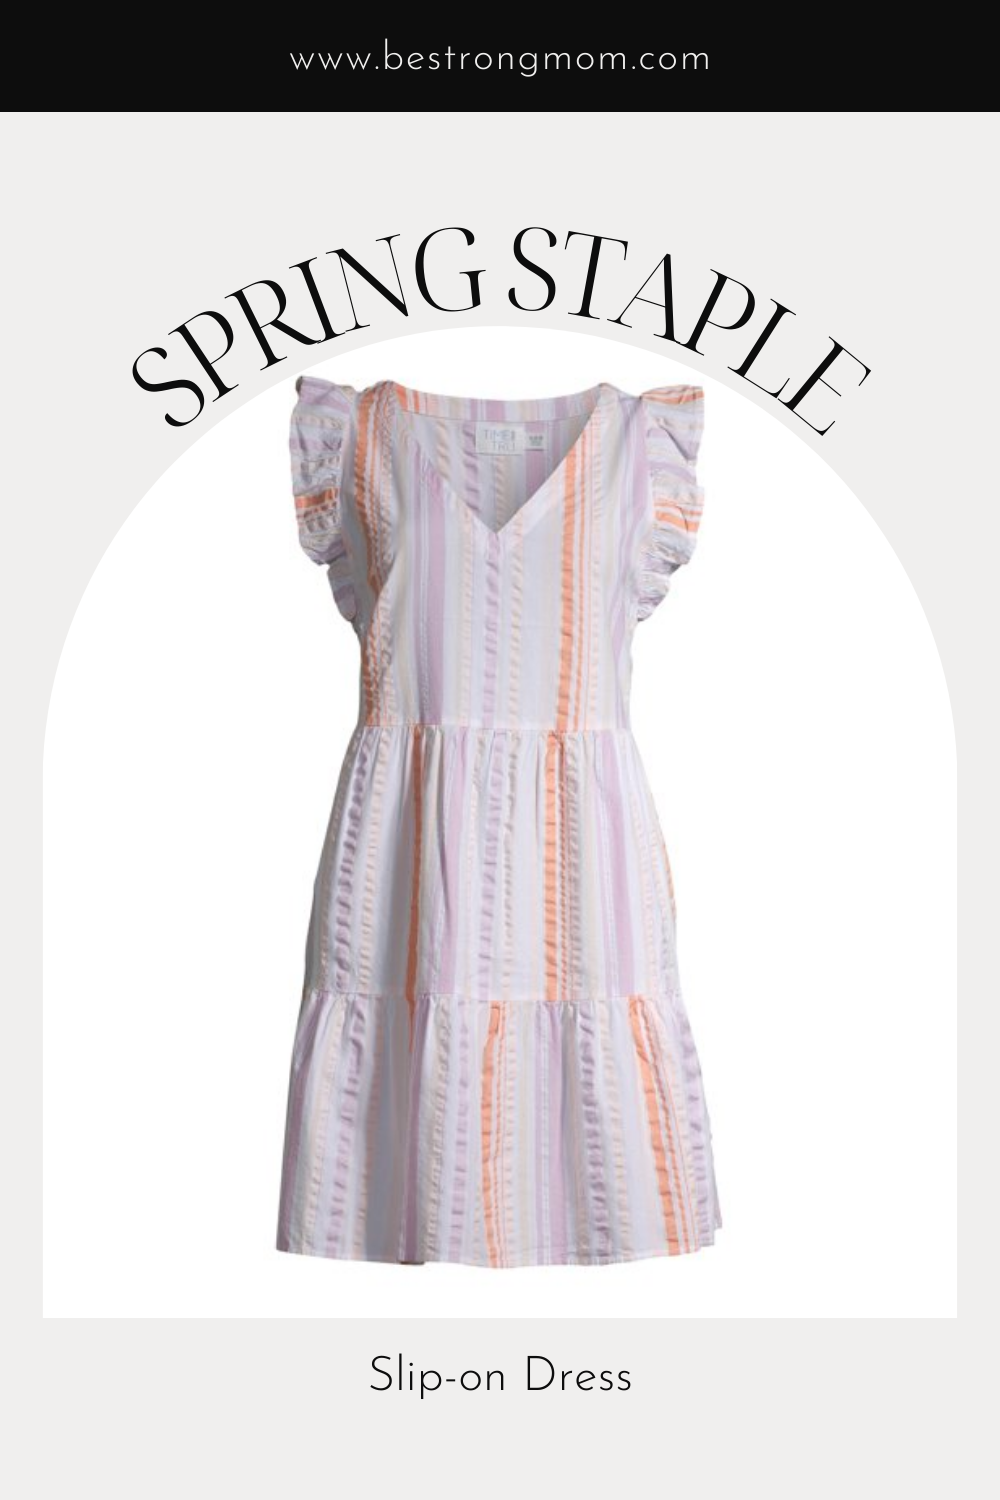 5 Spring Staples from Walmart (2).png